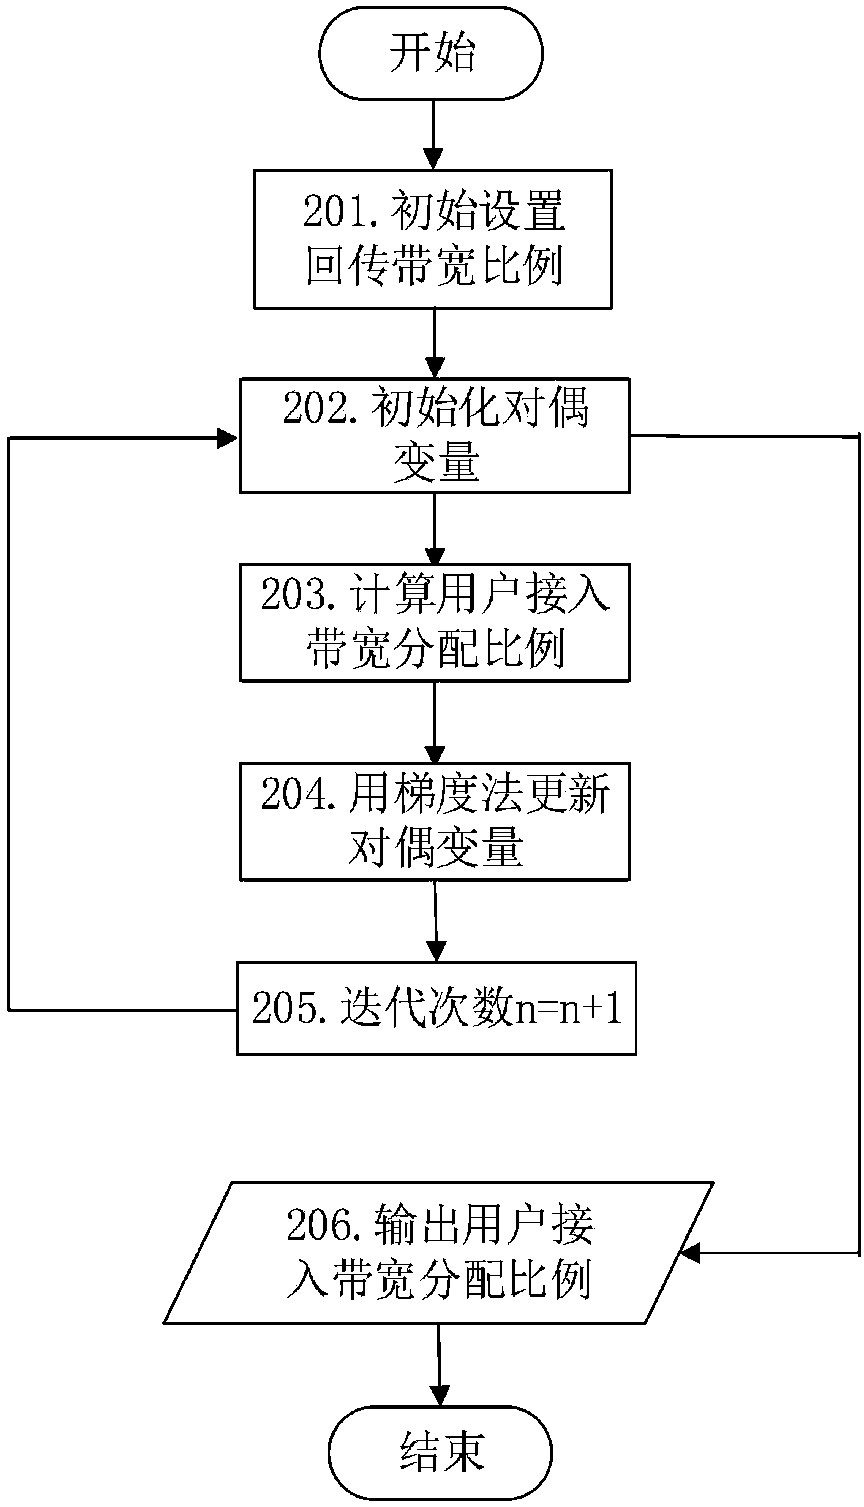 Wireless self-backhauling resource scheduling method based on system stability